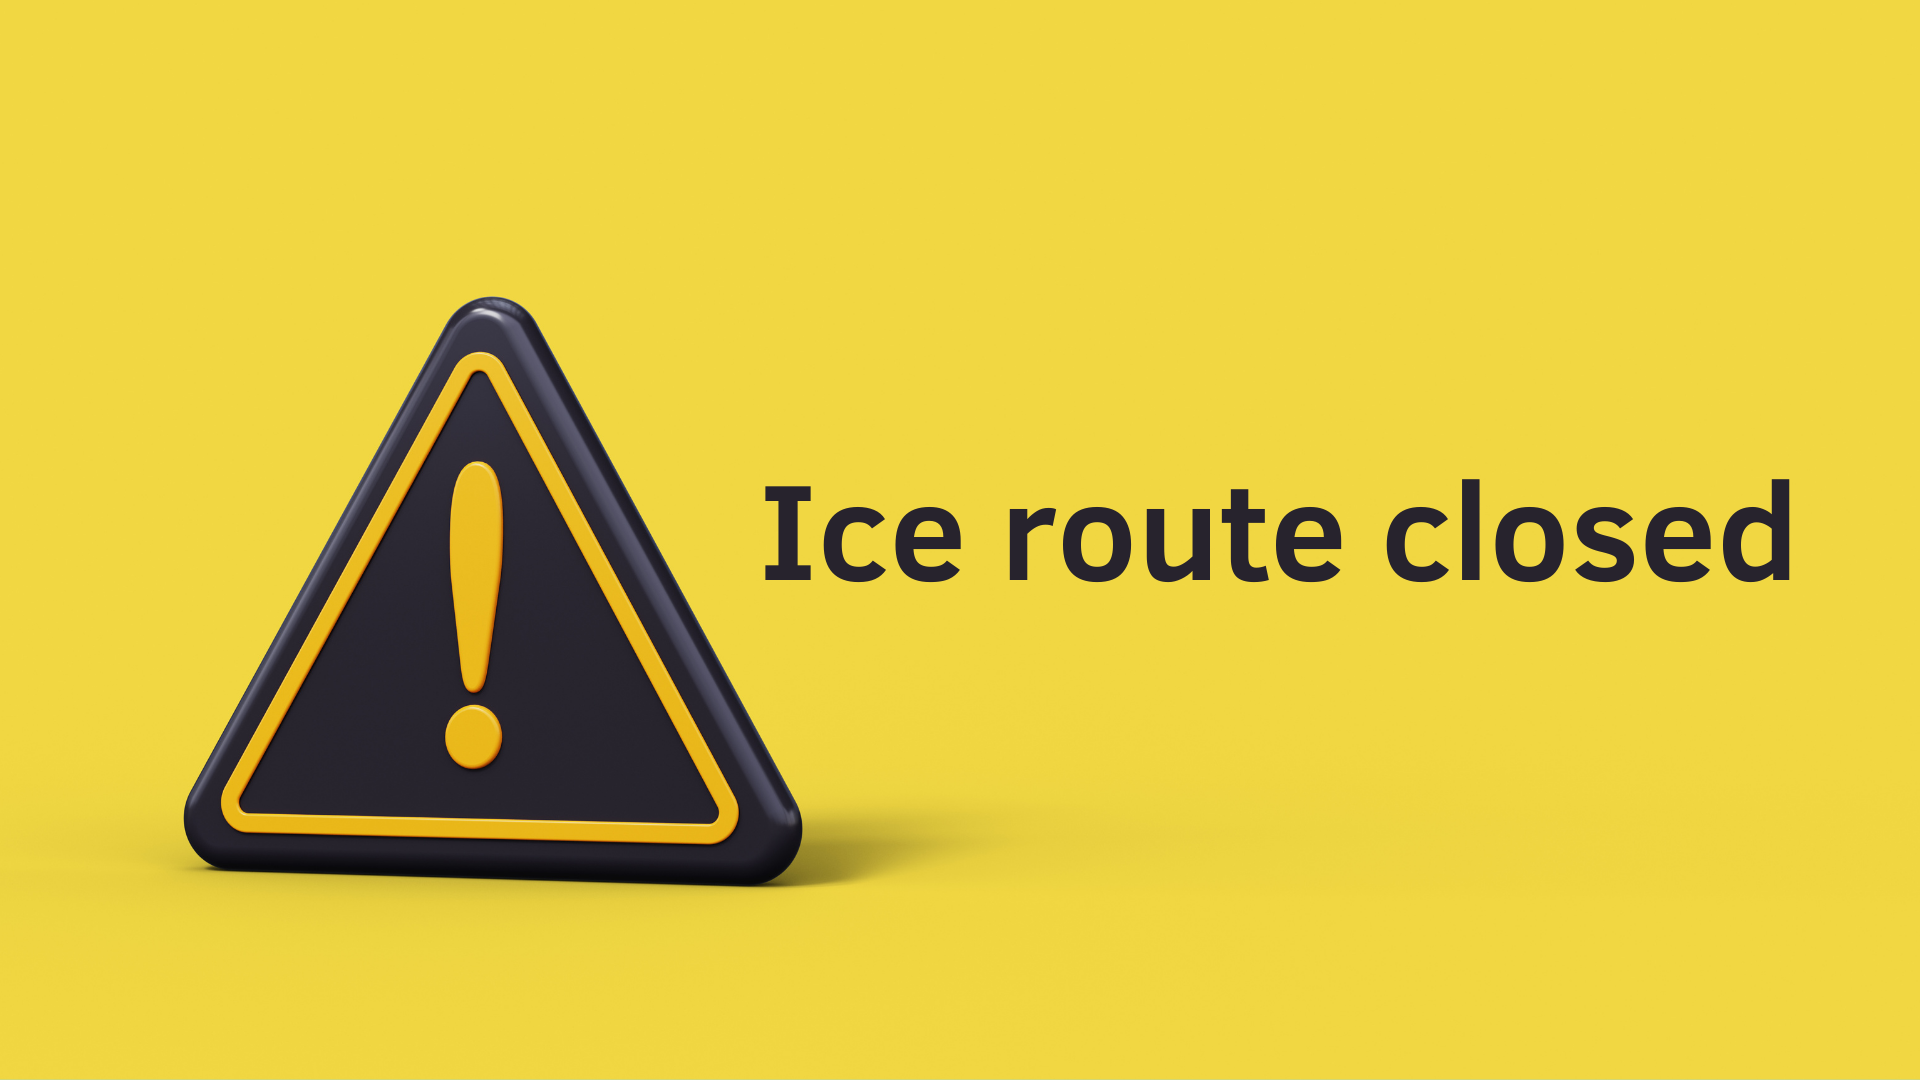 Ice route closed.